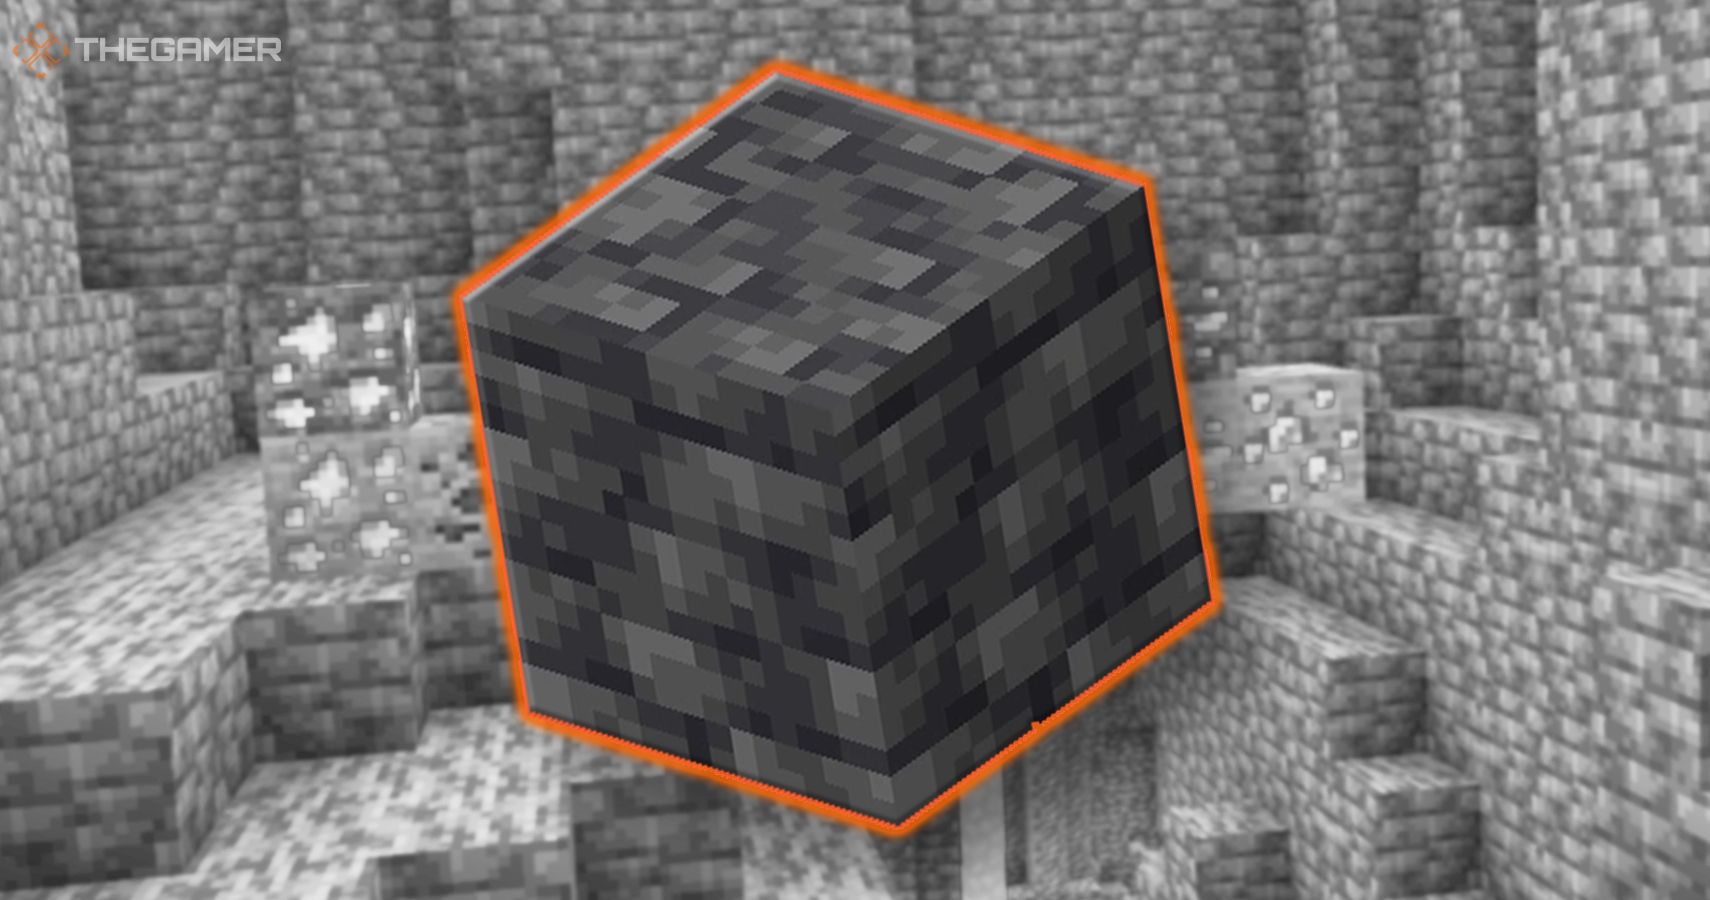 deepslate block in front of a cavern